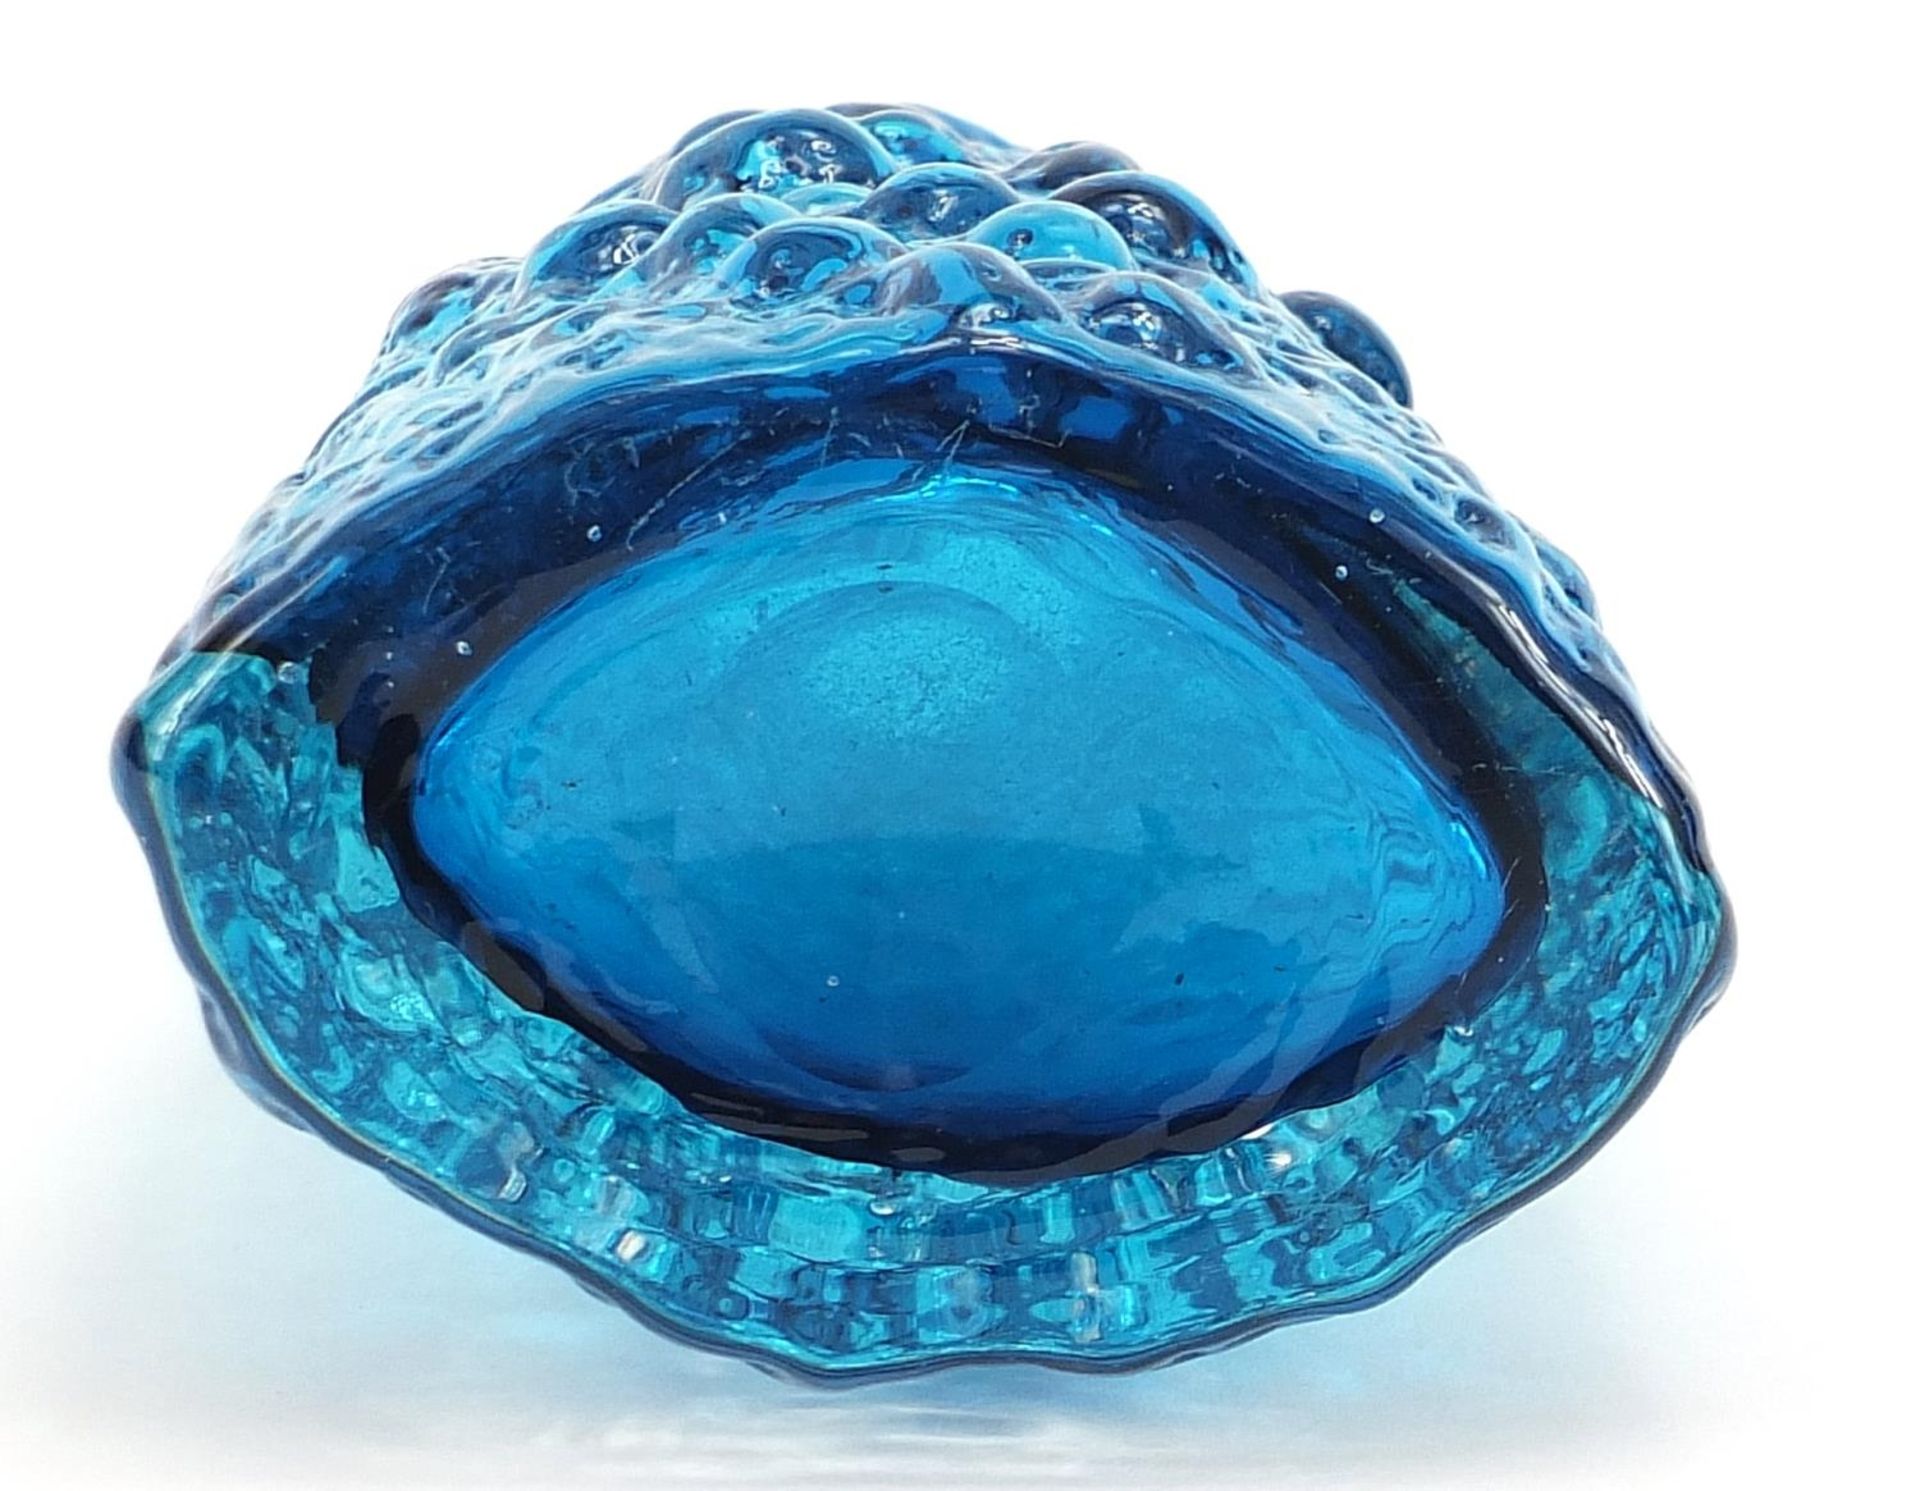 Geoffrey Baxter for Whitefriars, volcano glass vase in kingfisher blue, 18cm high - Image 3 of 3